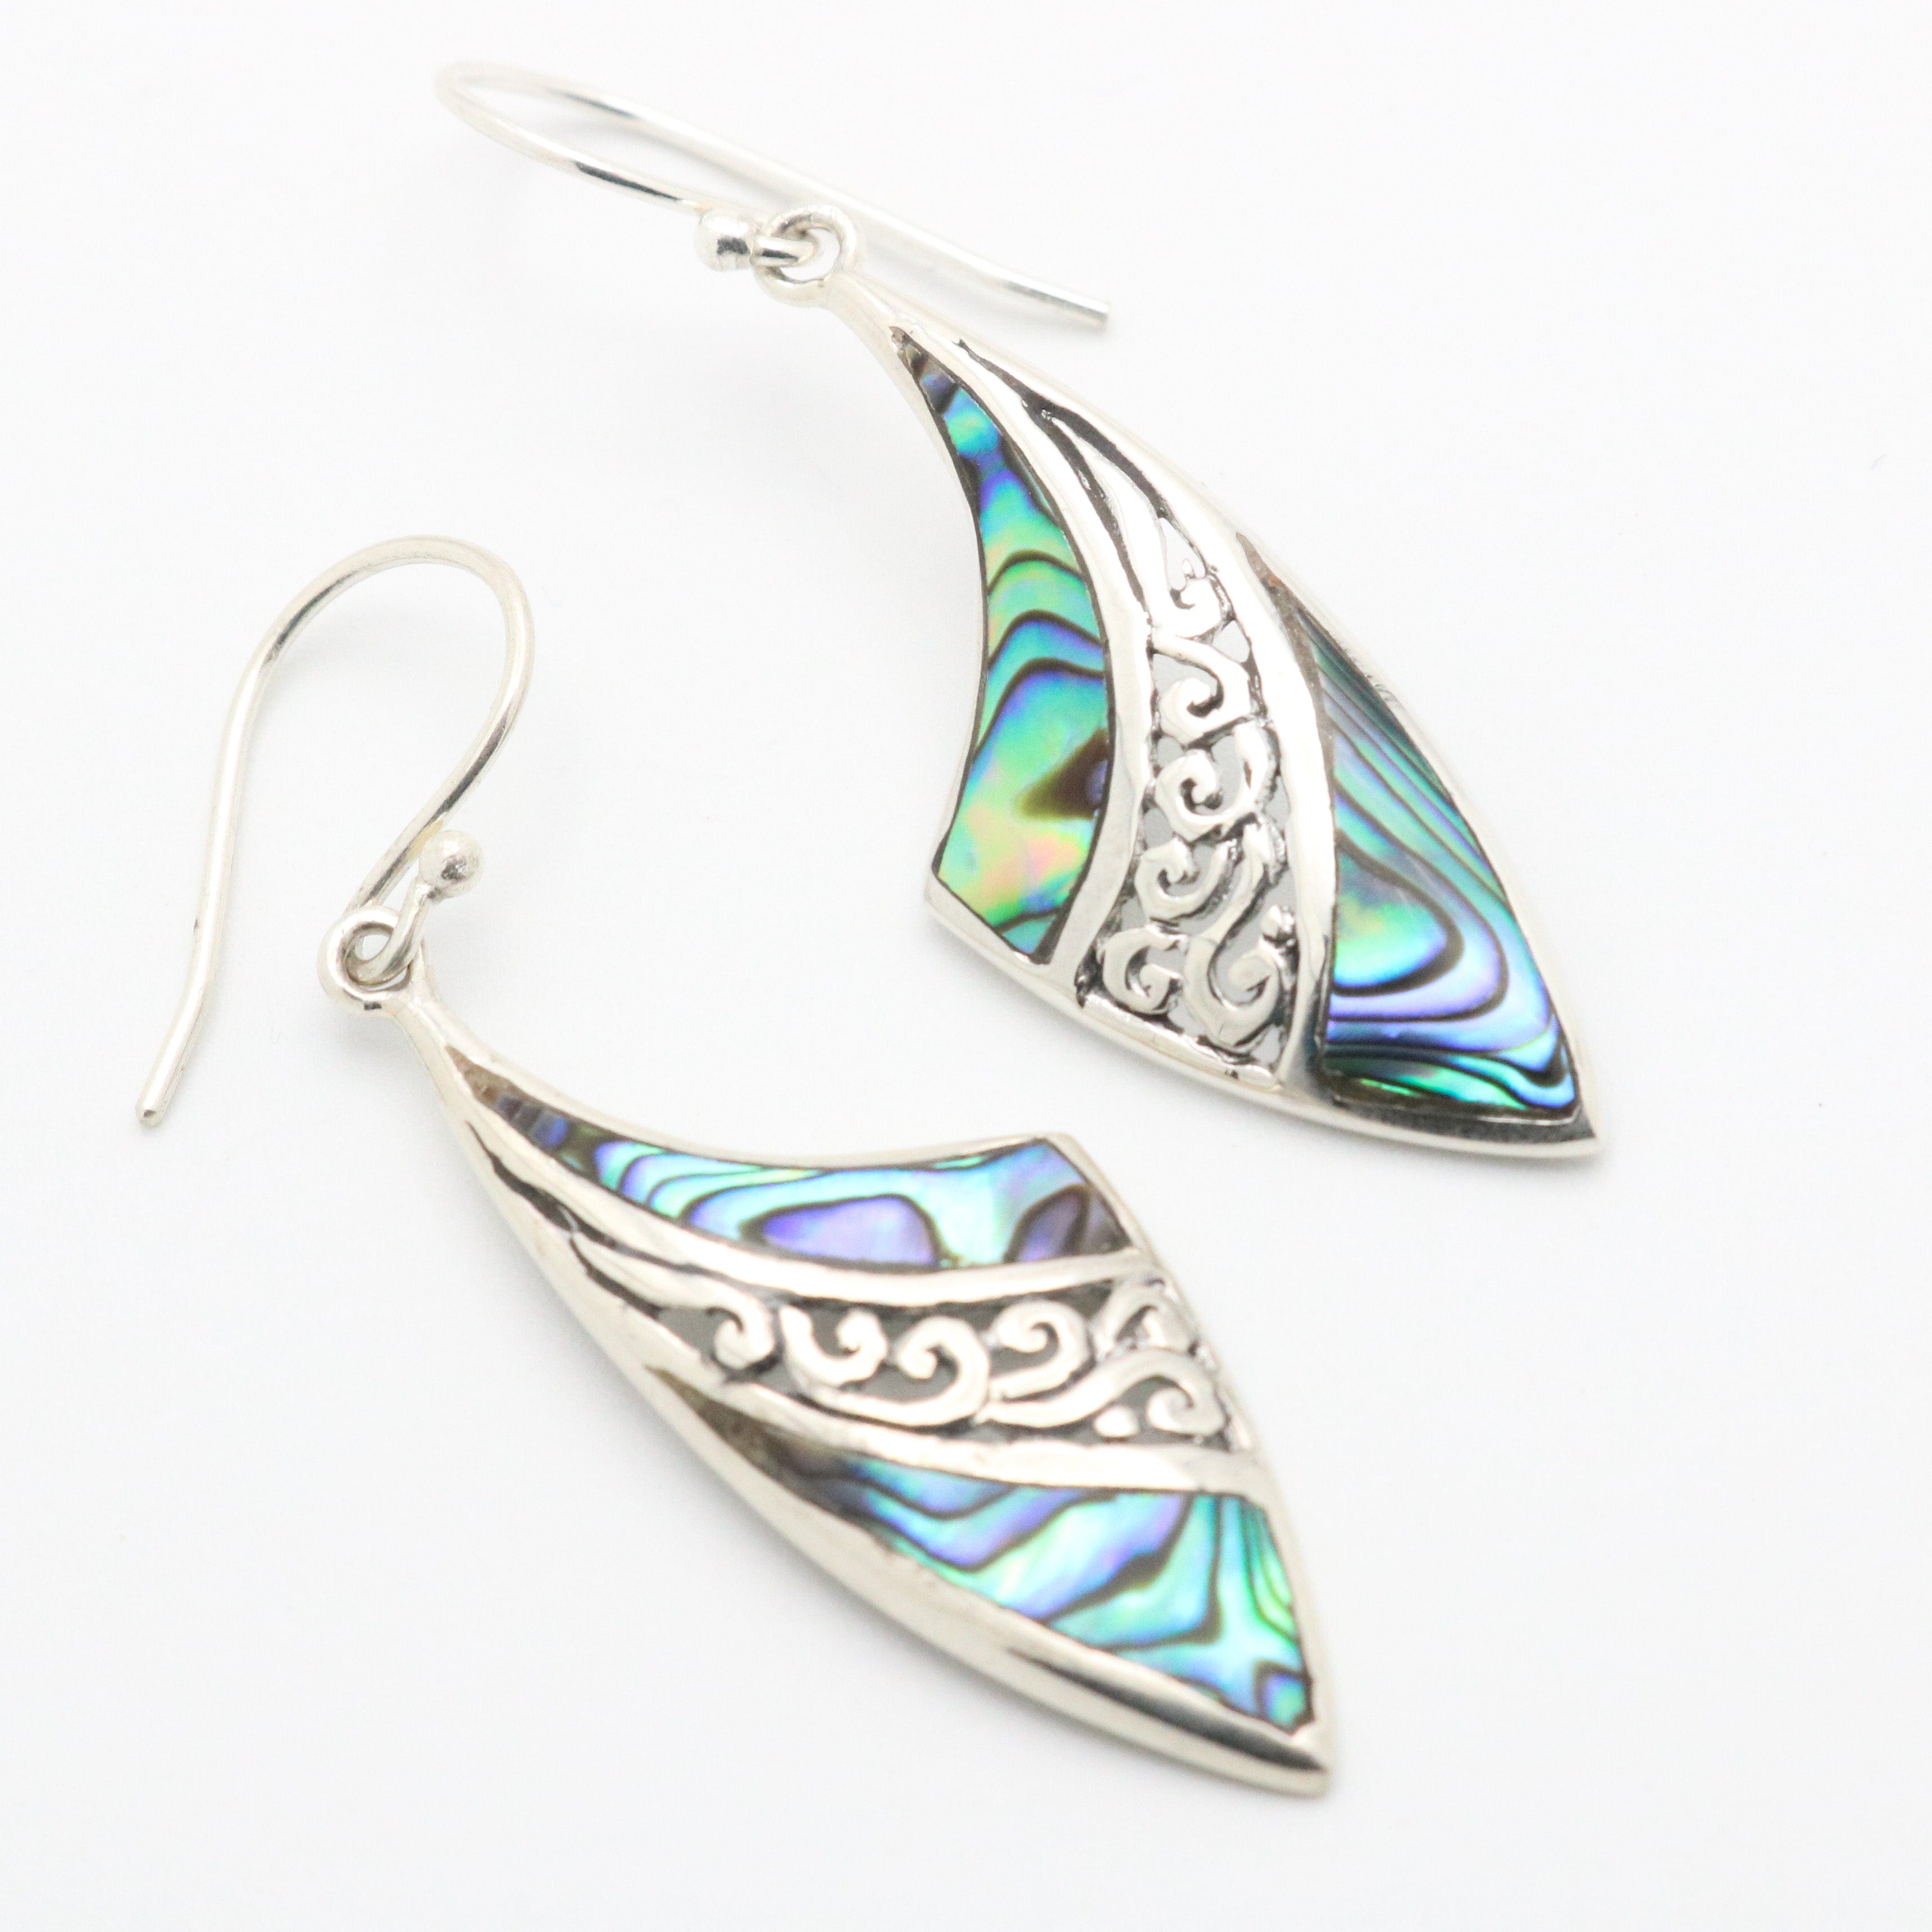 Hepburn and Hughes Abalone Shell Earrings | Abstract with Swirl | Sterling Silver